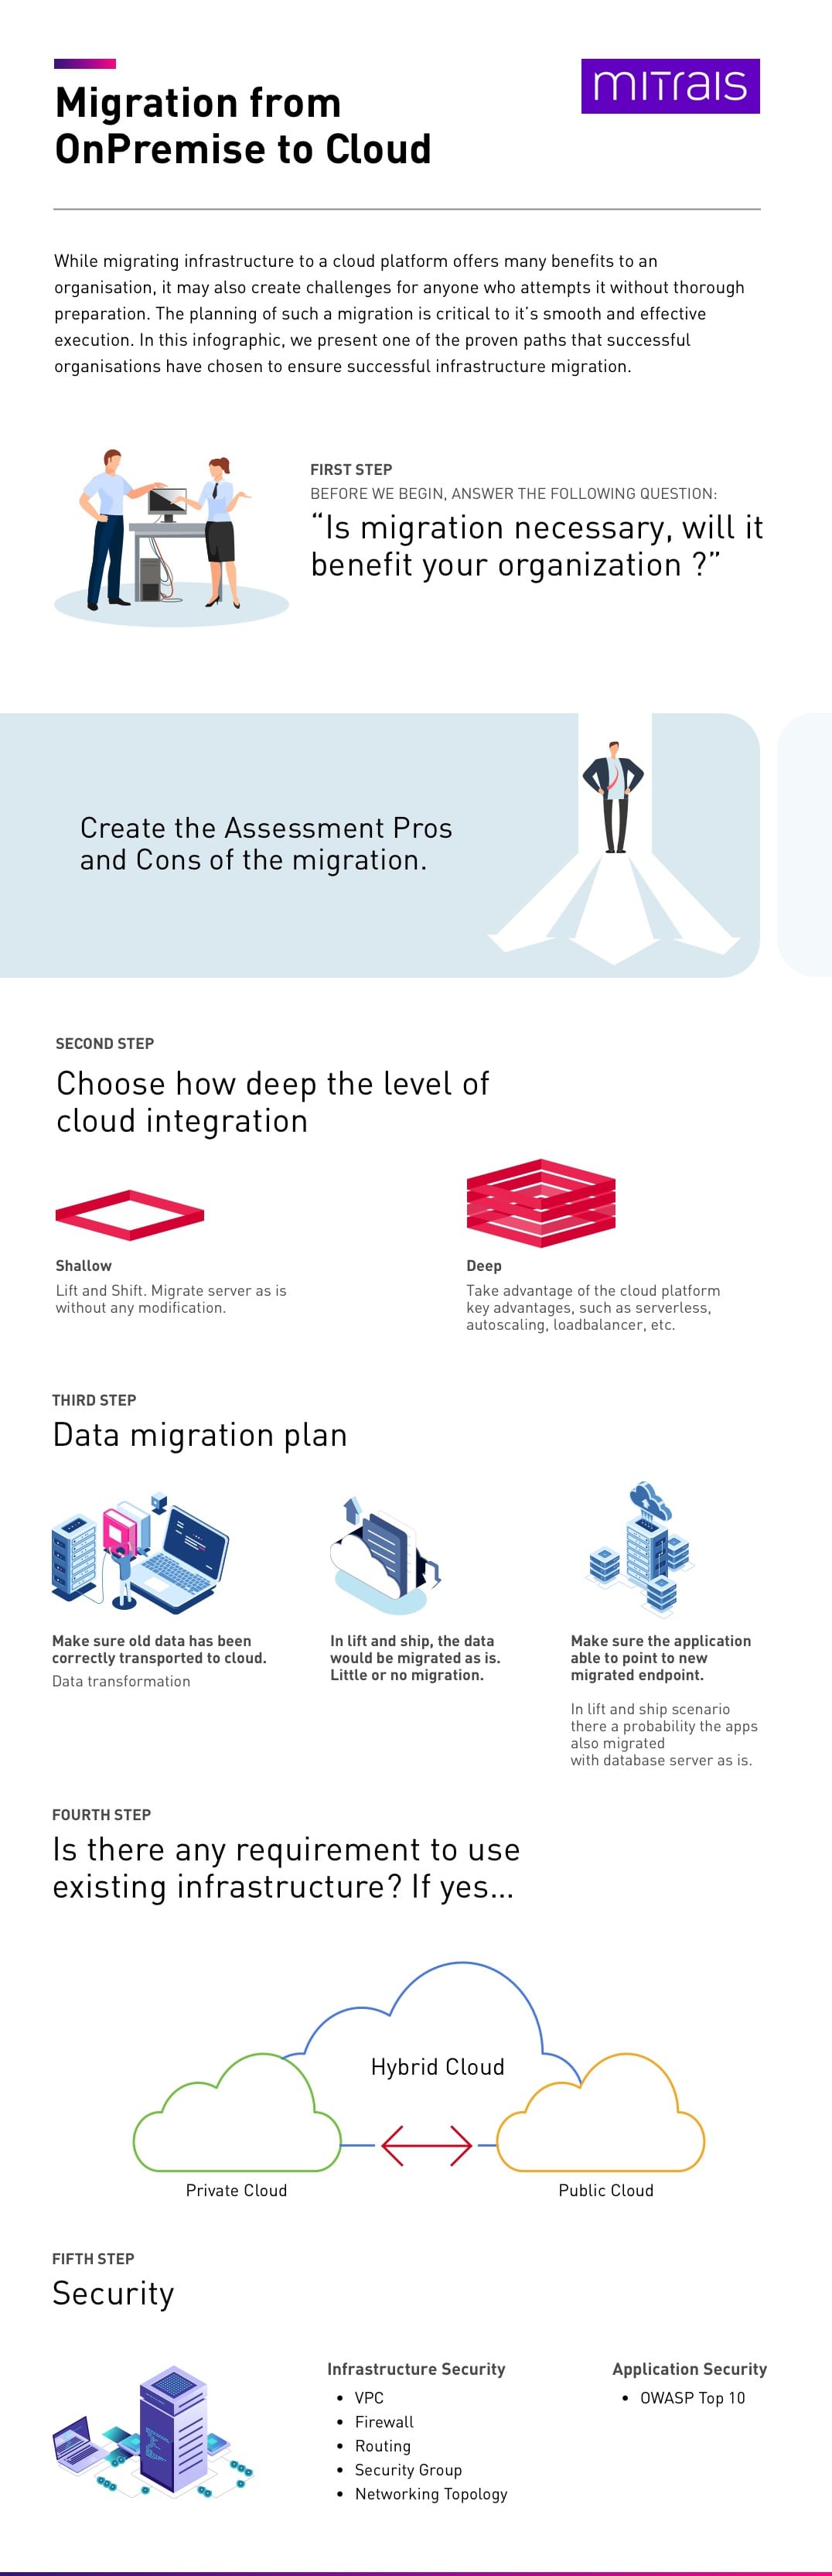 Is migration necessary? Will it benefit your organization? This infographic presents one path that can be used as starting point for organization to migrate to cloud.